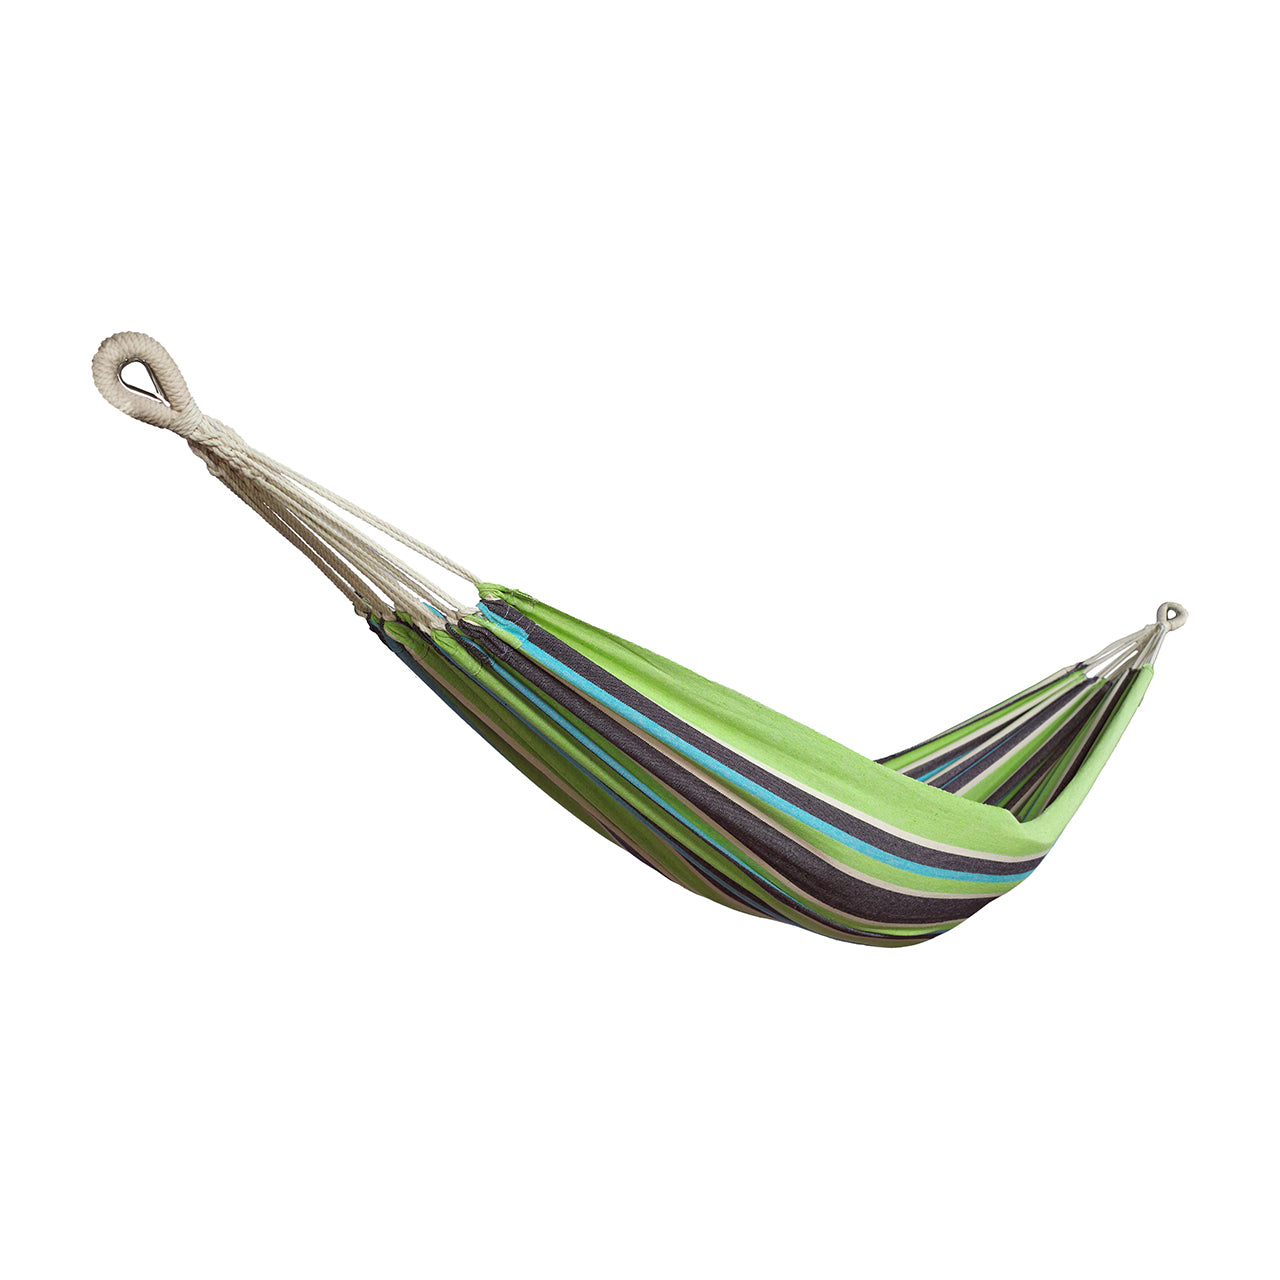 Bliss Hammocks 40-inch Wide Hammock in a Bag with Hand-woven Rope loops in the country club variation.